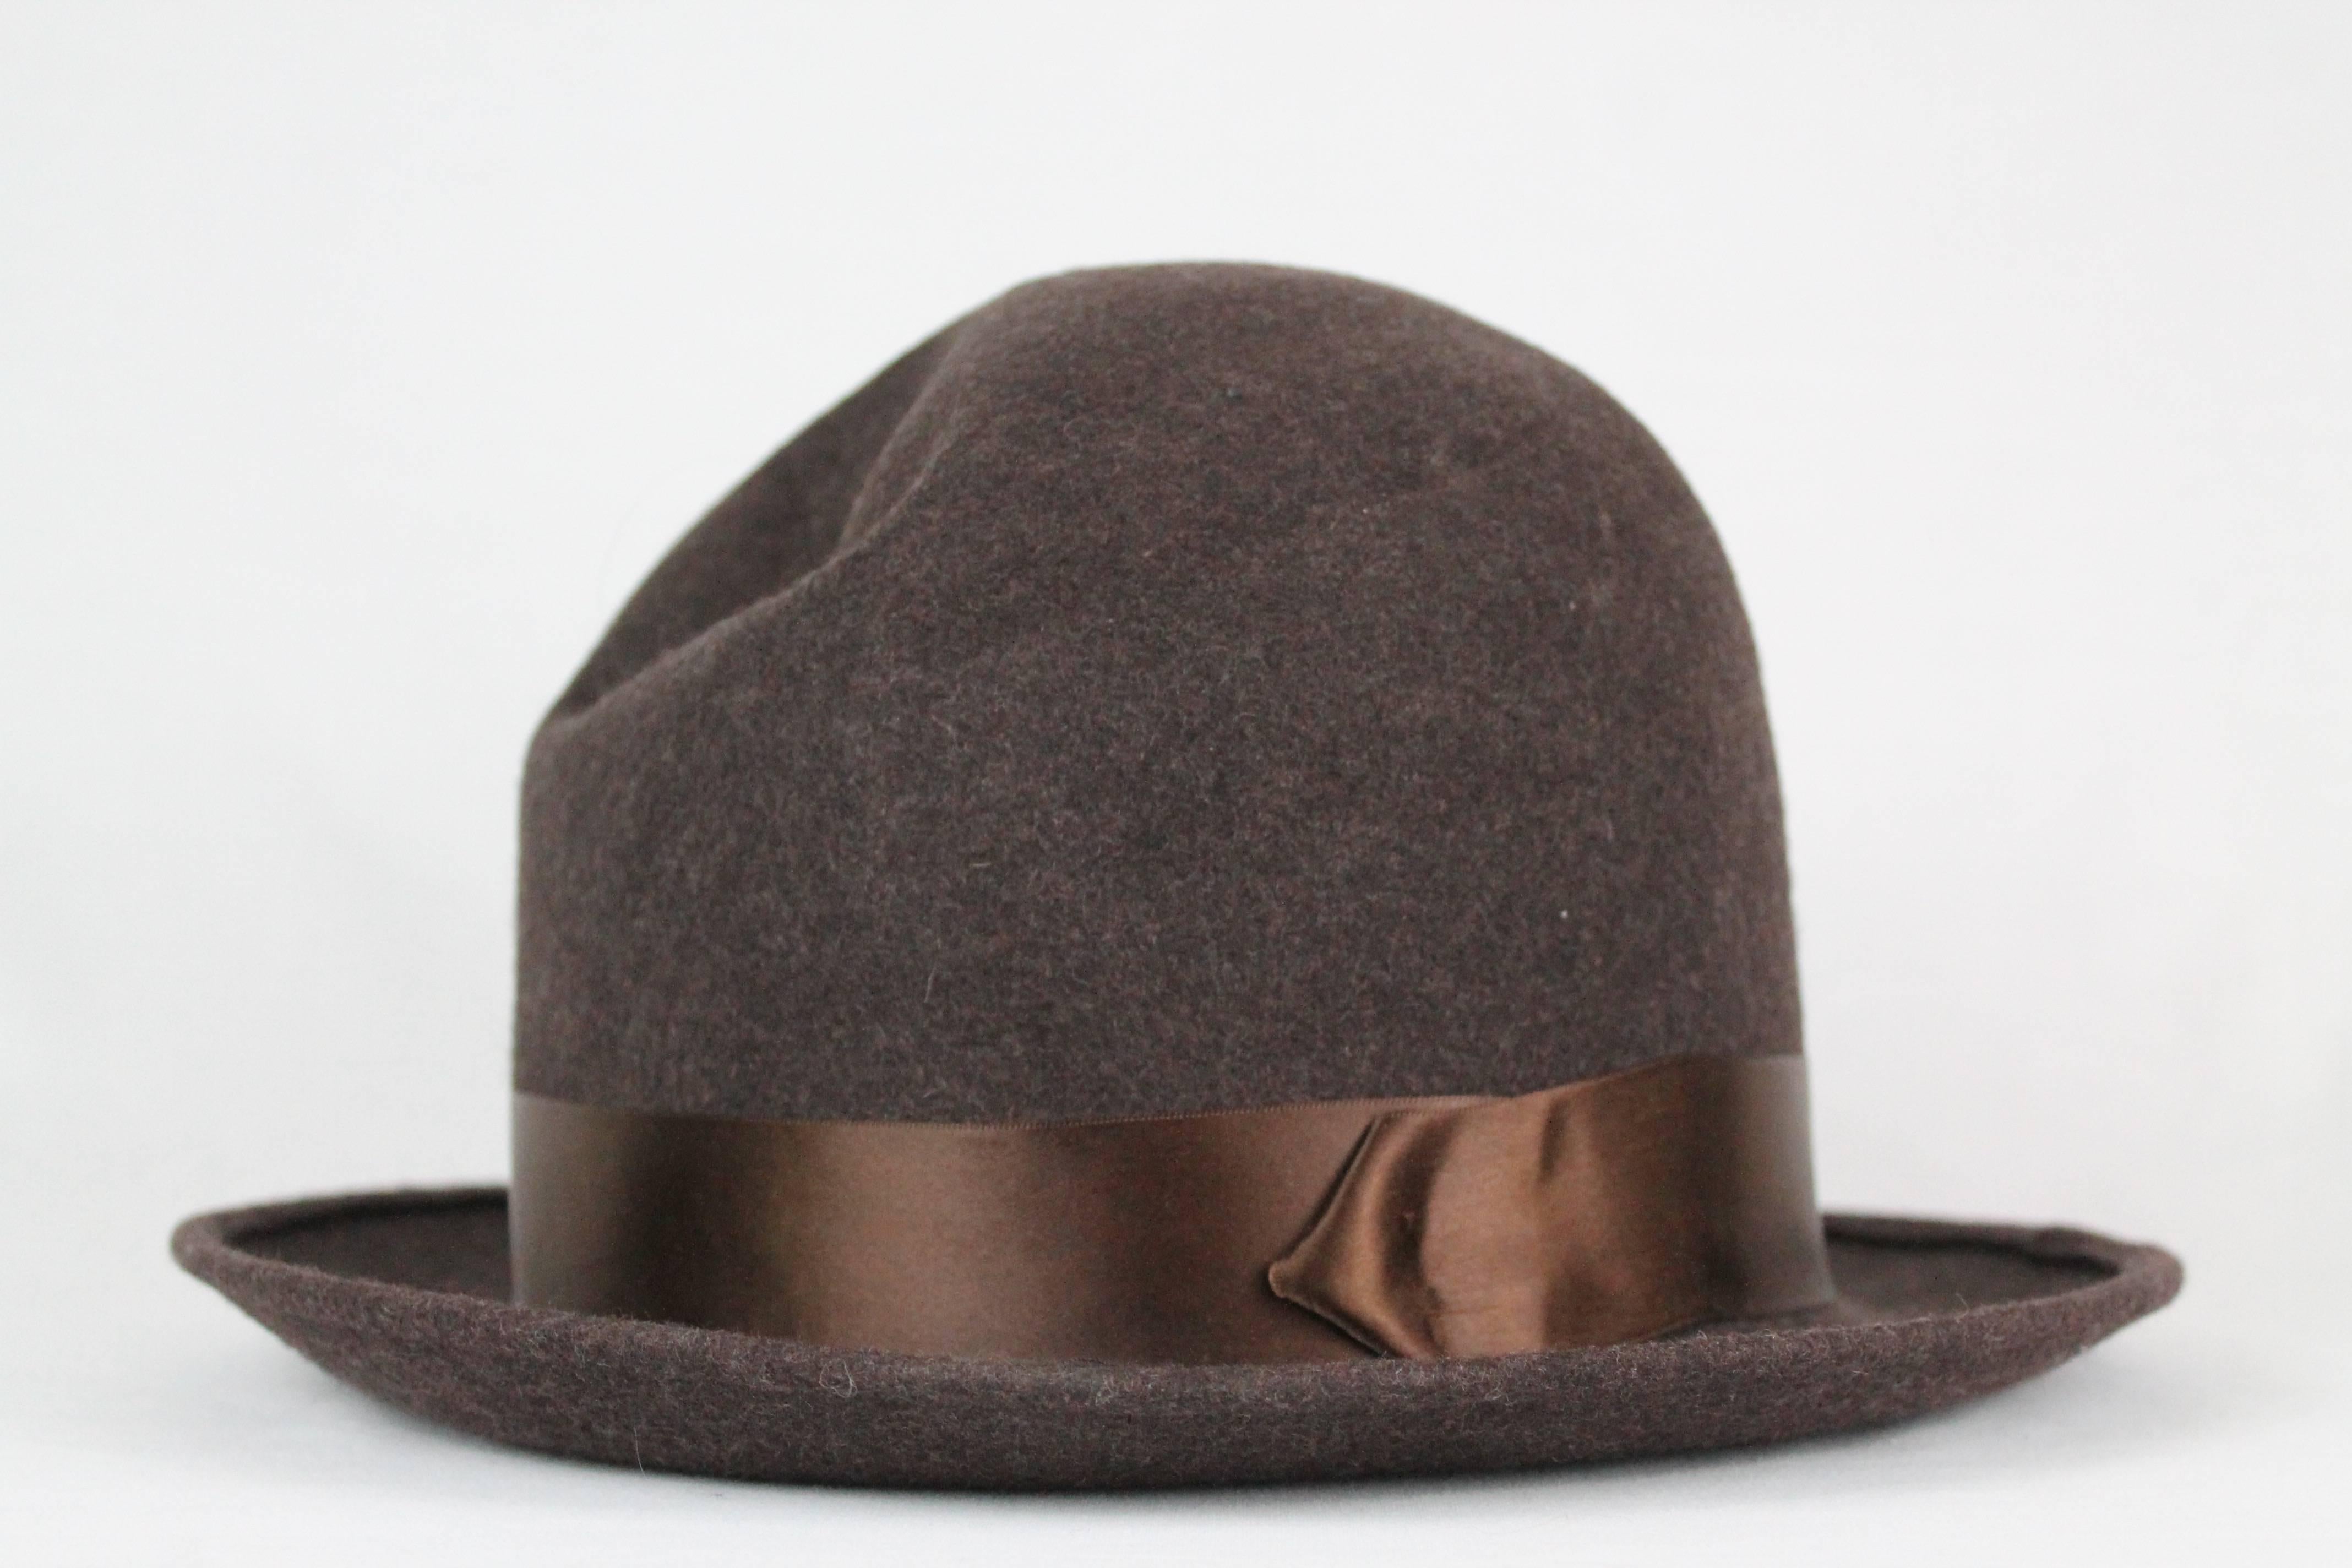 -Beautiful chocolate brown bowler from Christian Dior
-Made of 100% wool, bowler features brown ribbon  around the crown 
-Hat can be indented (as seen in pictures) or smoothed out to create round bowler look.
-Has a Peruvian hat look to it 
-It is